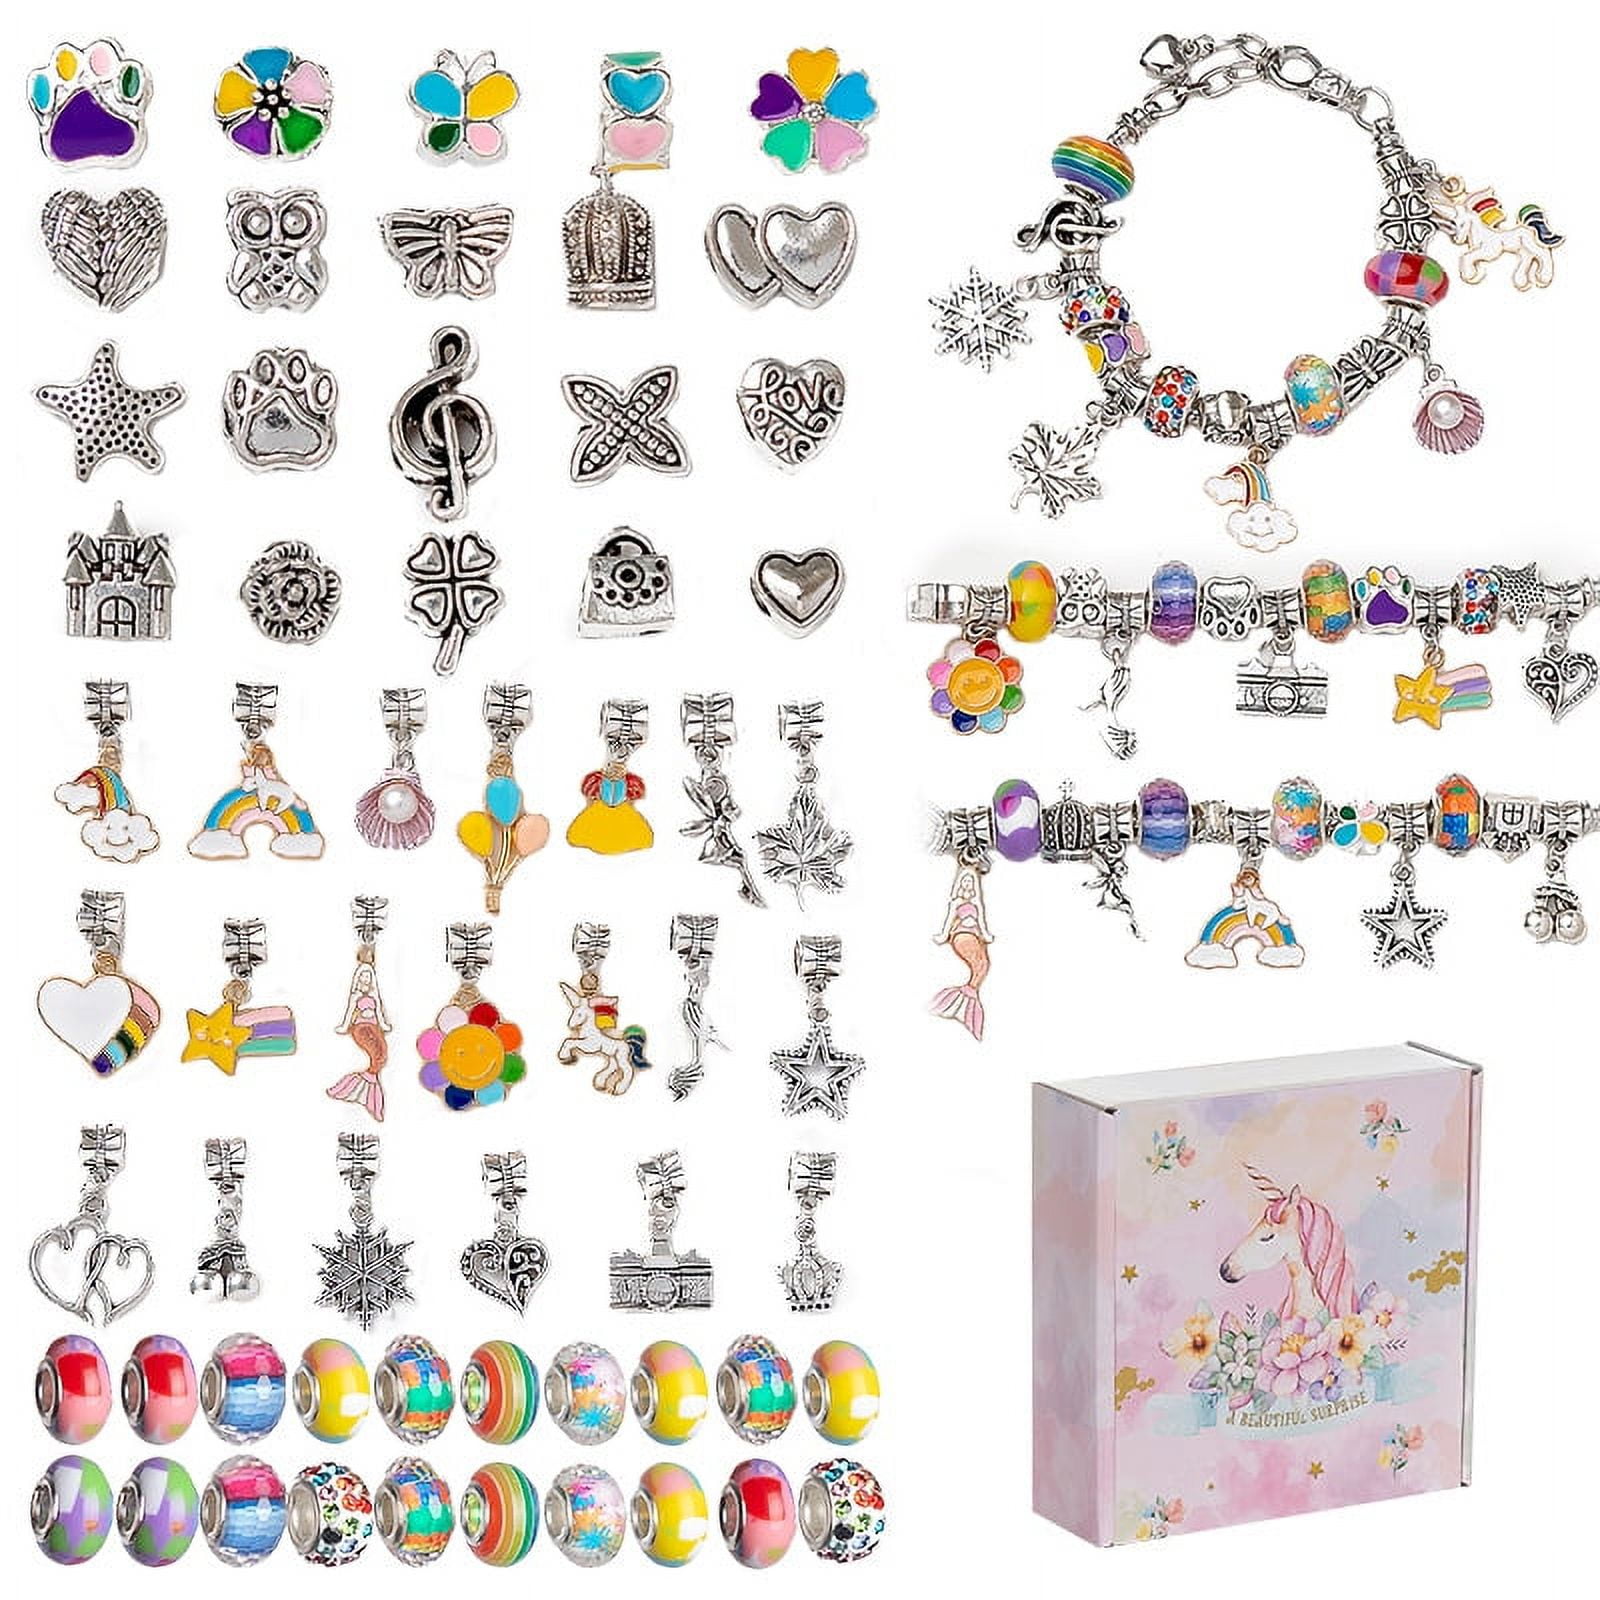  Prt.ASSTNT Friendship Charm Bracelet Jewelry Making Kit,  Unicorn Mermaid Gifts Toys for Girls 5 6 7 8 9 10 Year Old,Jewelry Making  Supplies Beads for Presents Girls Age 8-12, Princess Toys